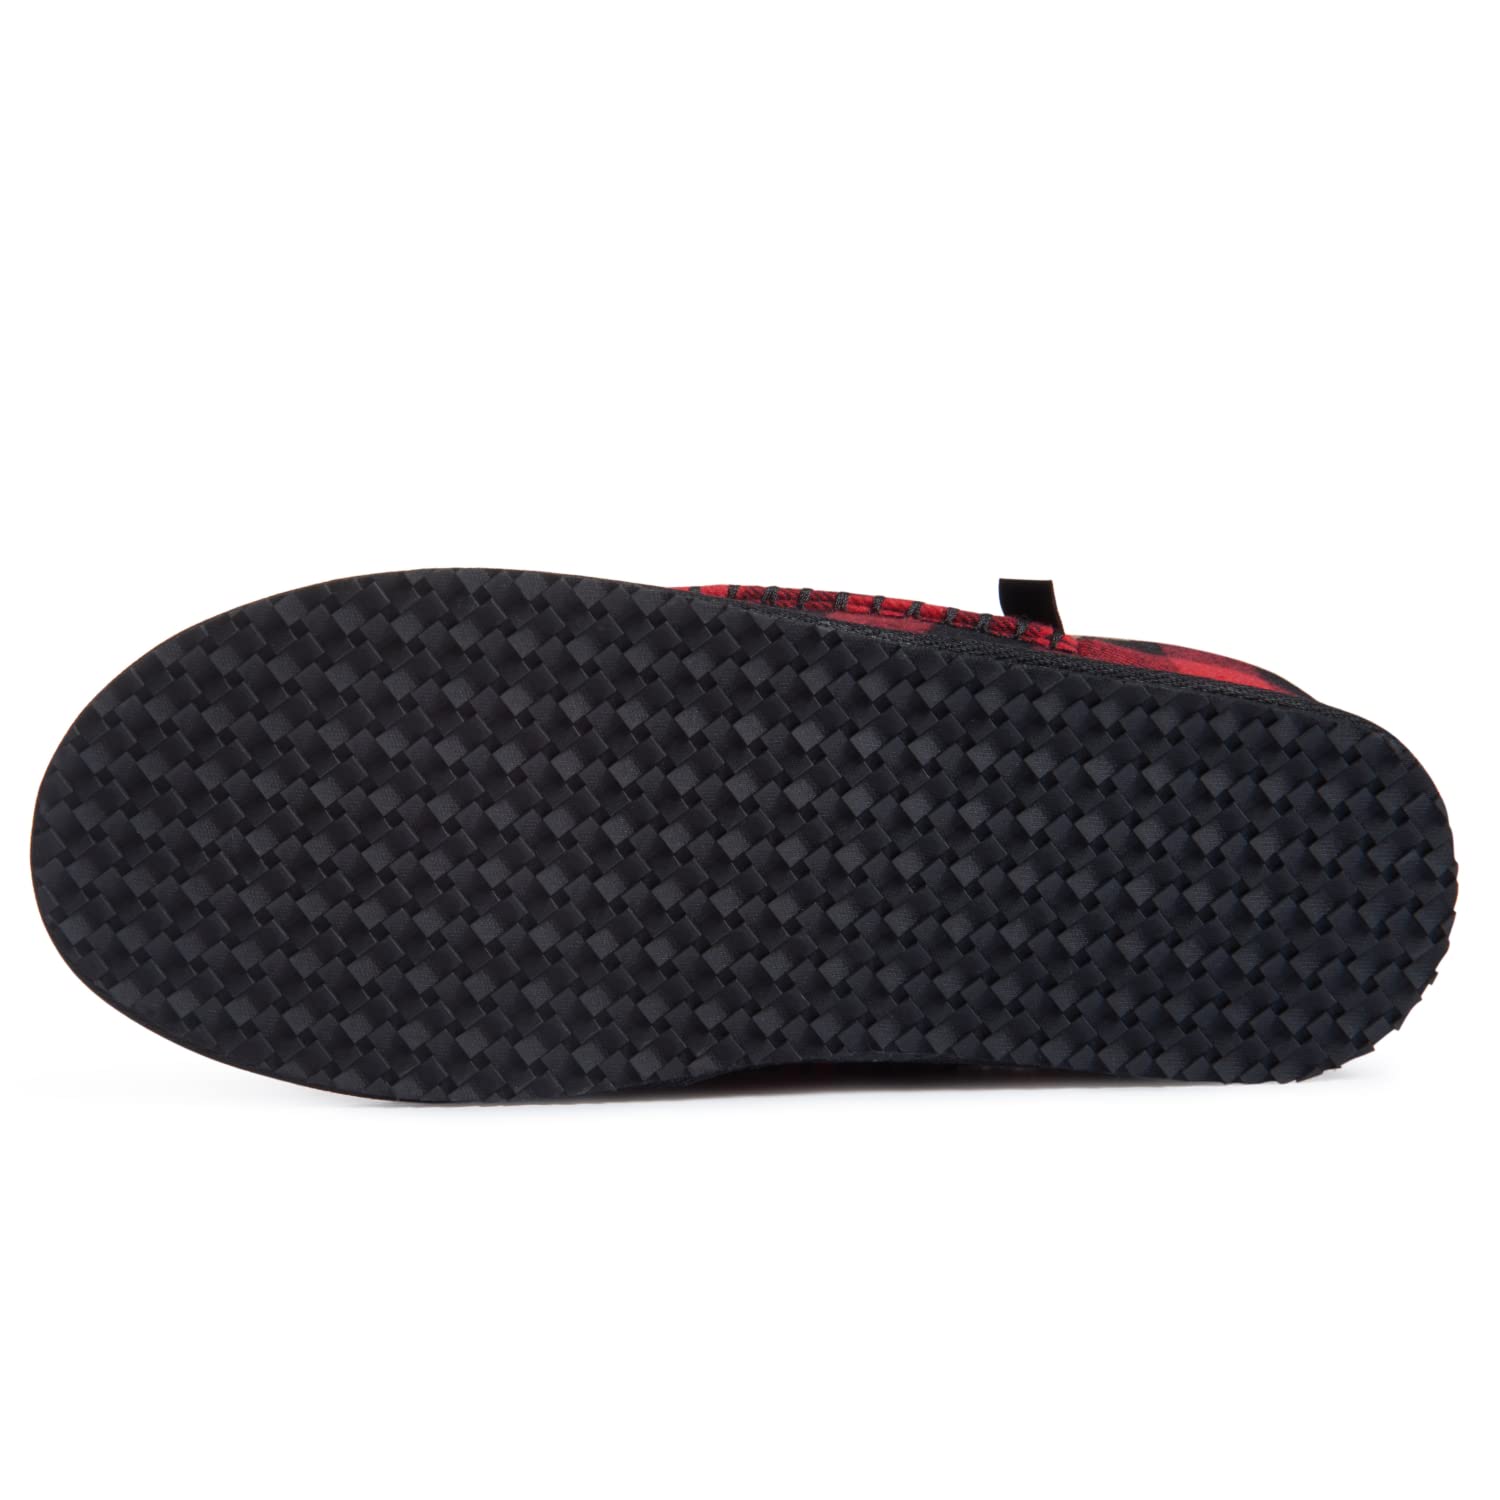 Lucky Brand Men's Plaid Memory Foam Slip On Clog Slippers, Indoor Outdoor Mens House Shoes, Warm Bedroom Clogs Slipper for Men, Red, Large